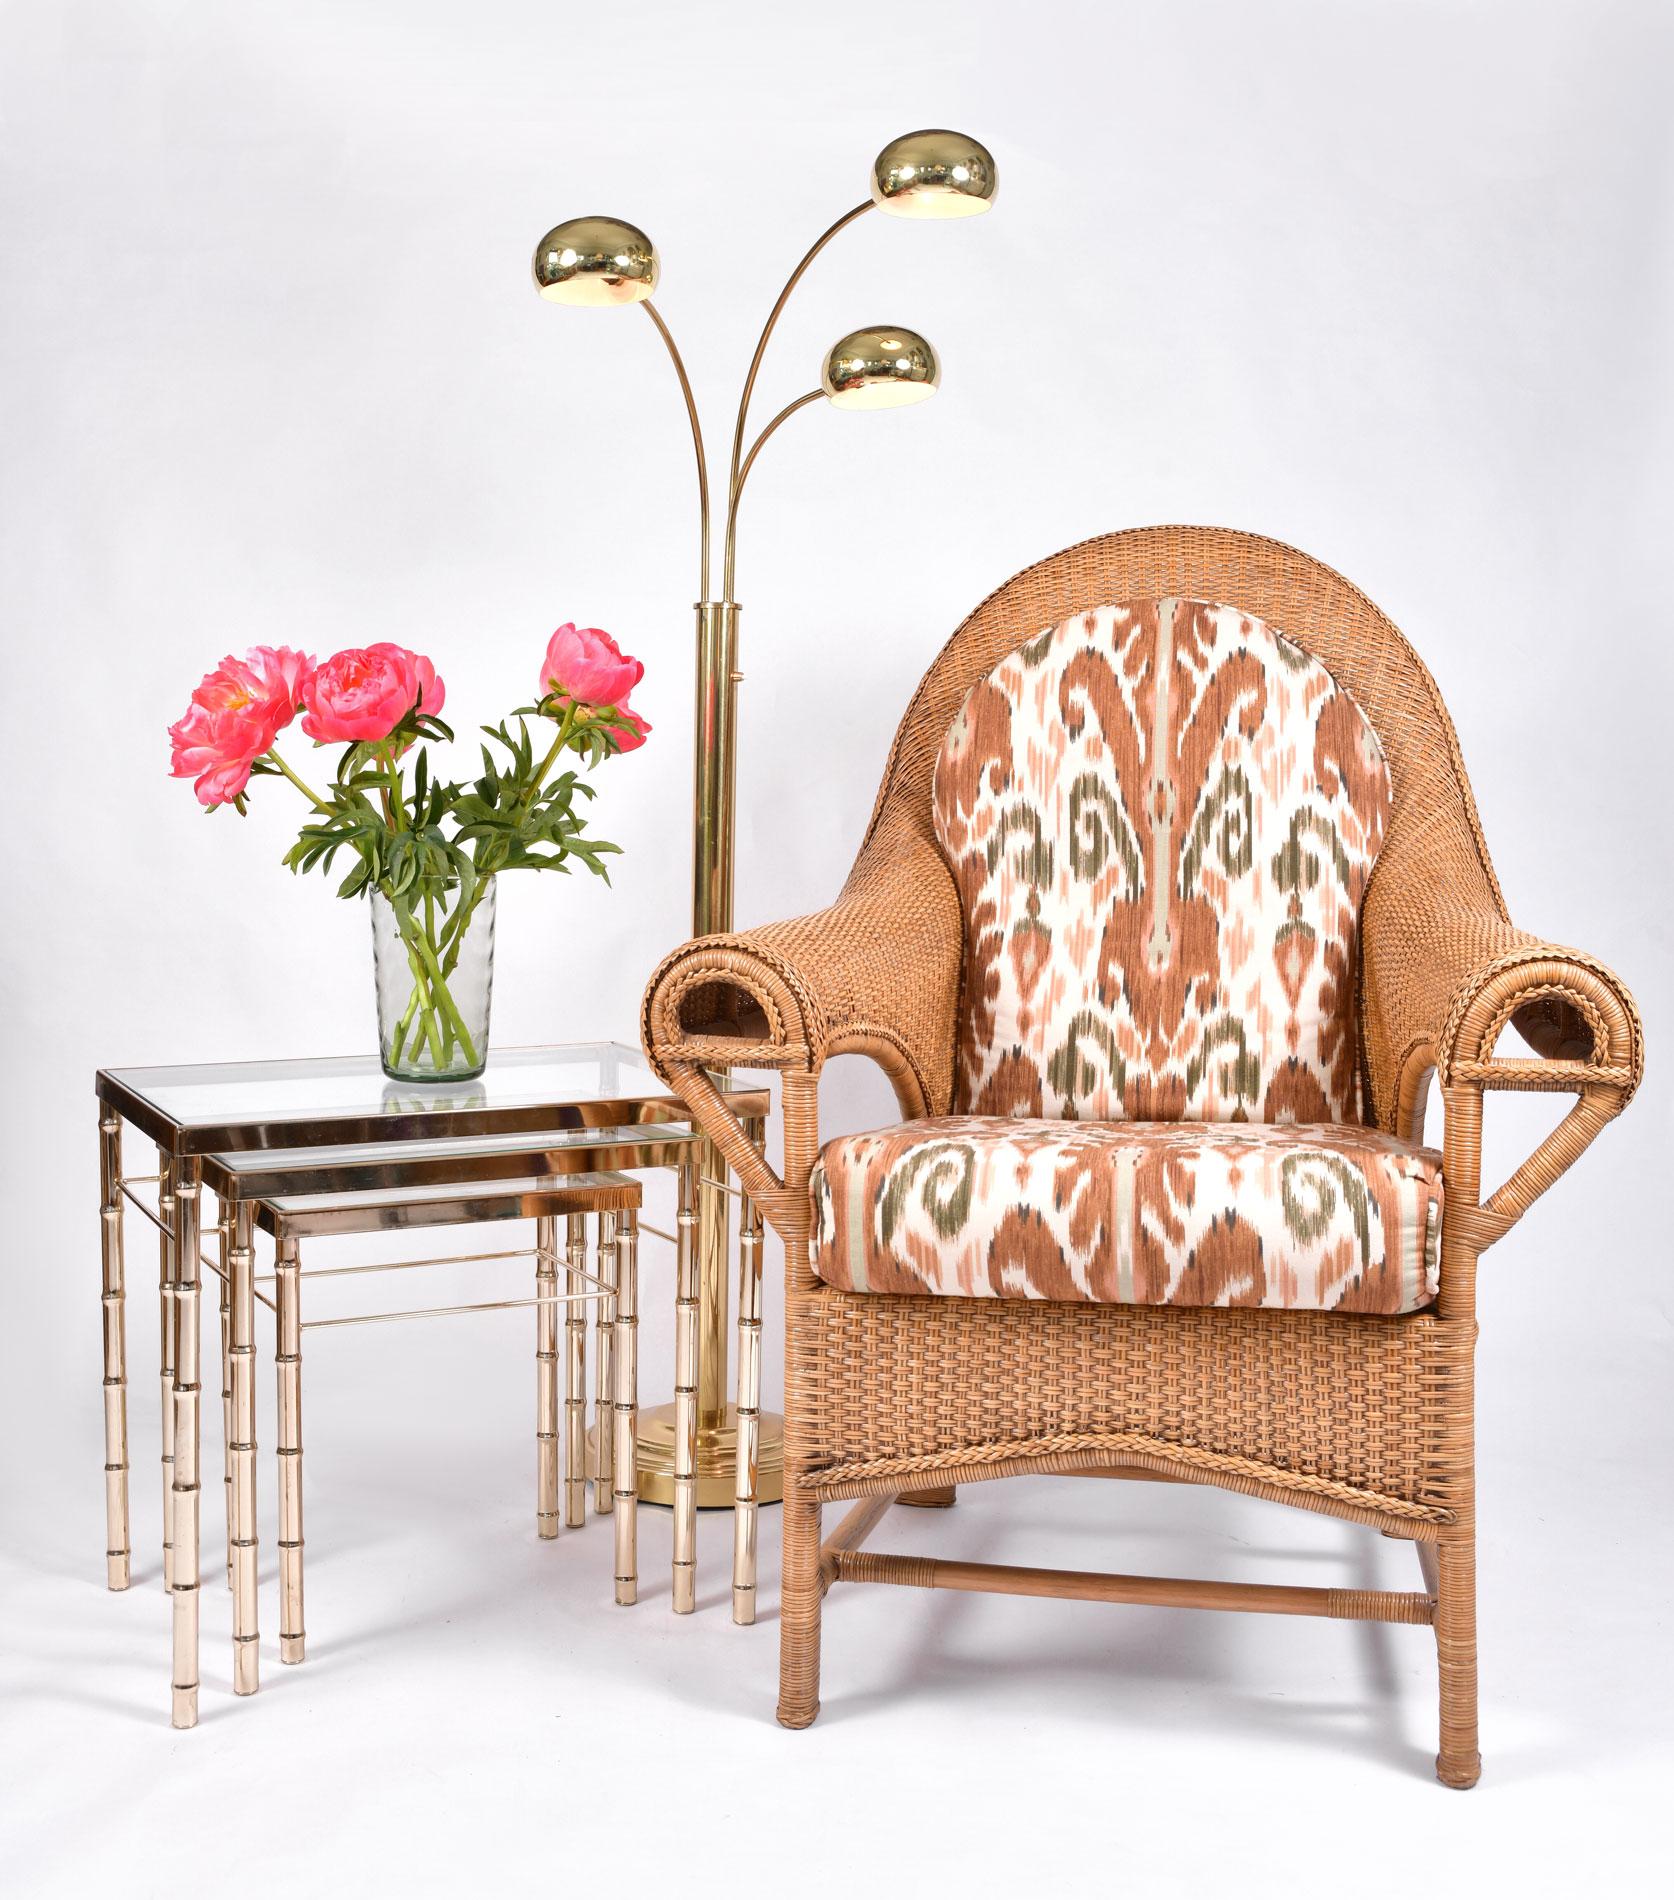 Imposing pair of wicker chairs featuring a range of decorative and detailed woven work. High backed and very comfortable. A perfect addition to any conservatory.

Smooth arms end in a semi circular detail. Upholstered in Ikat style cotton which